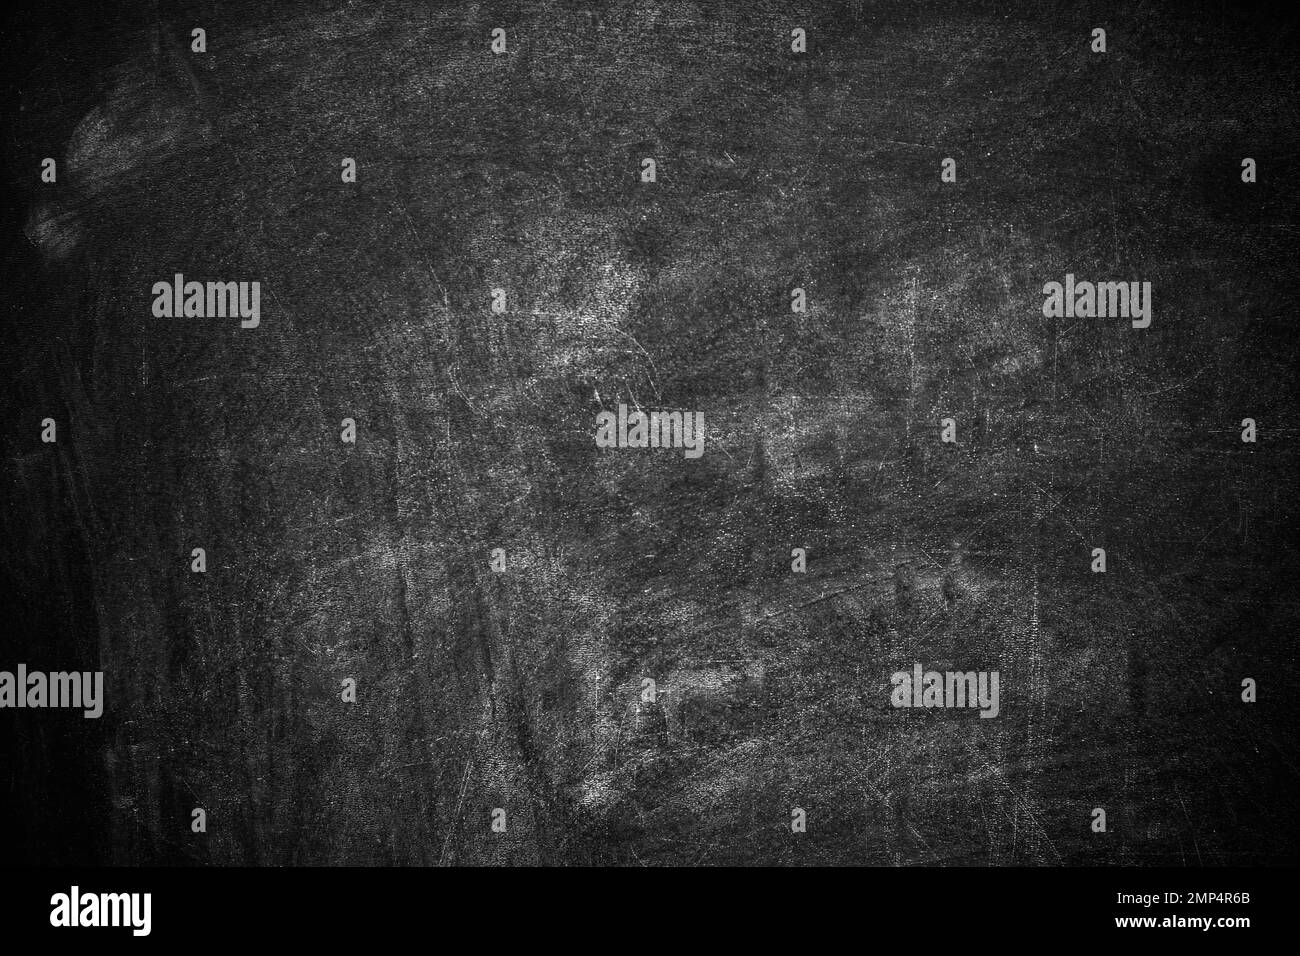 Dirty black chalkboard as background. Space for text Stock Photo